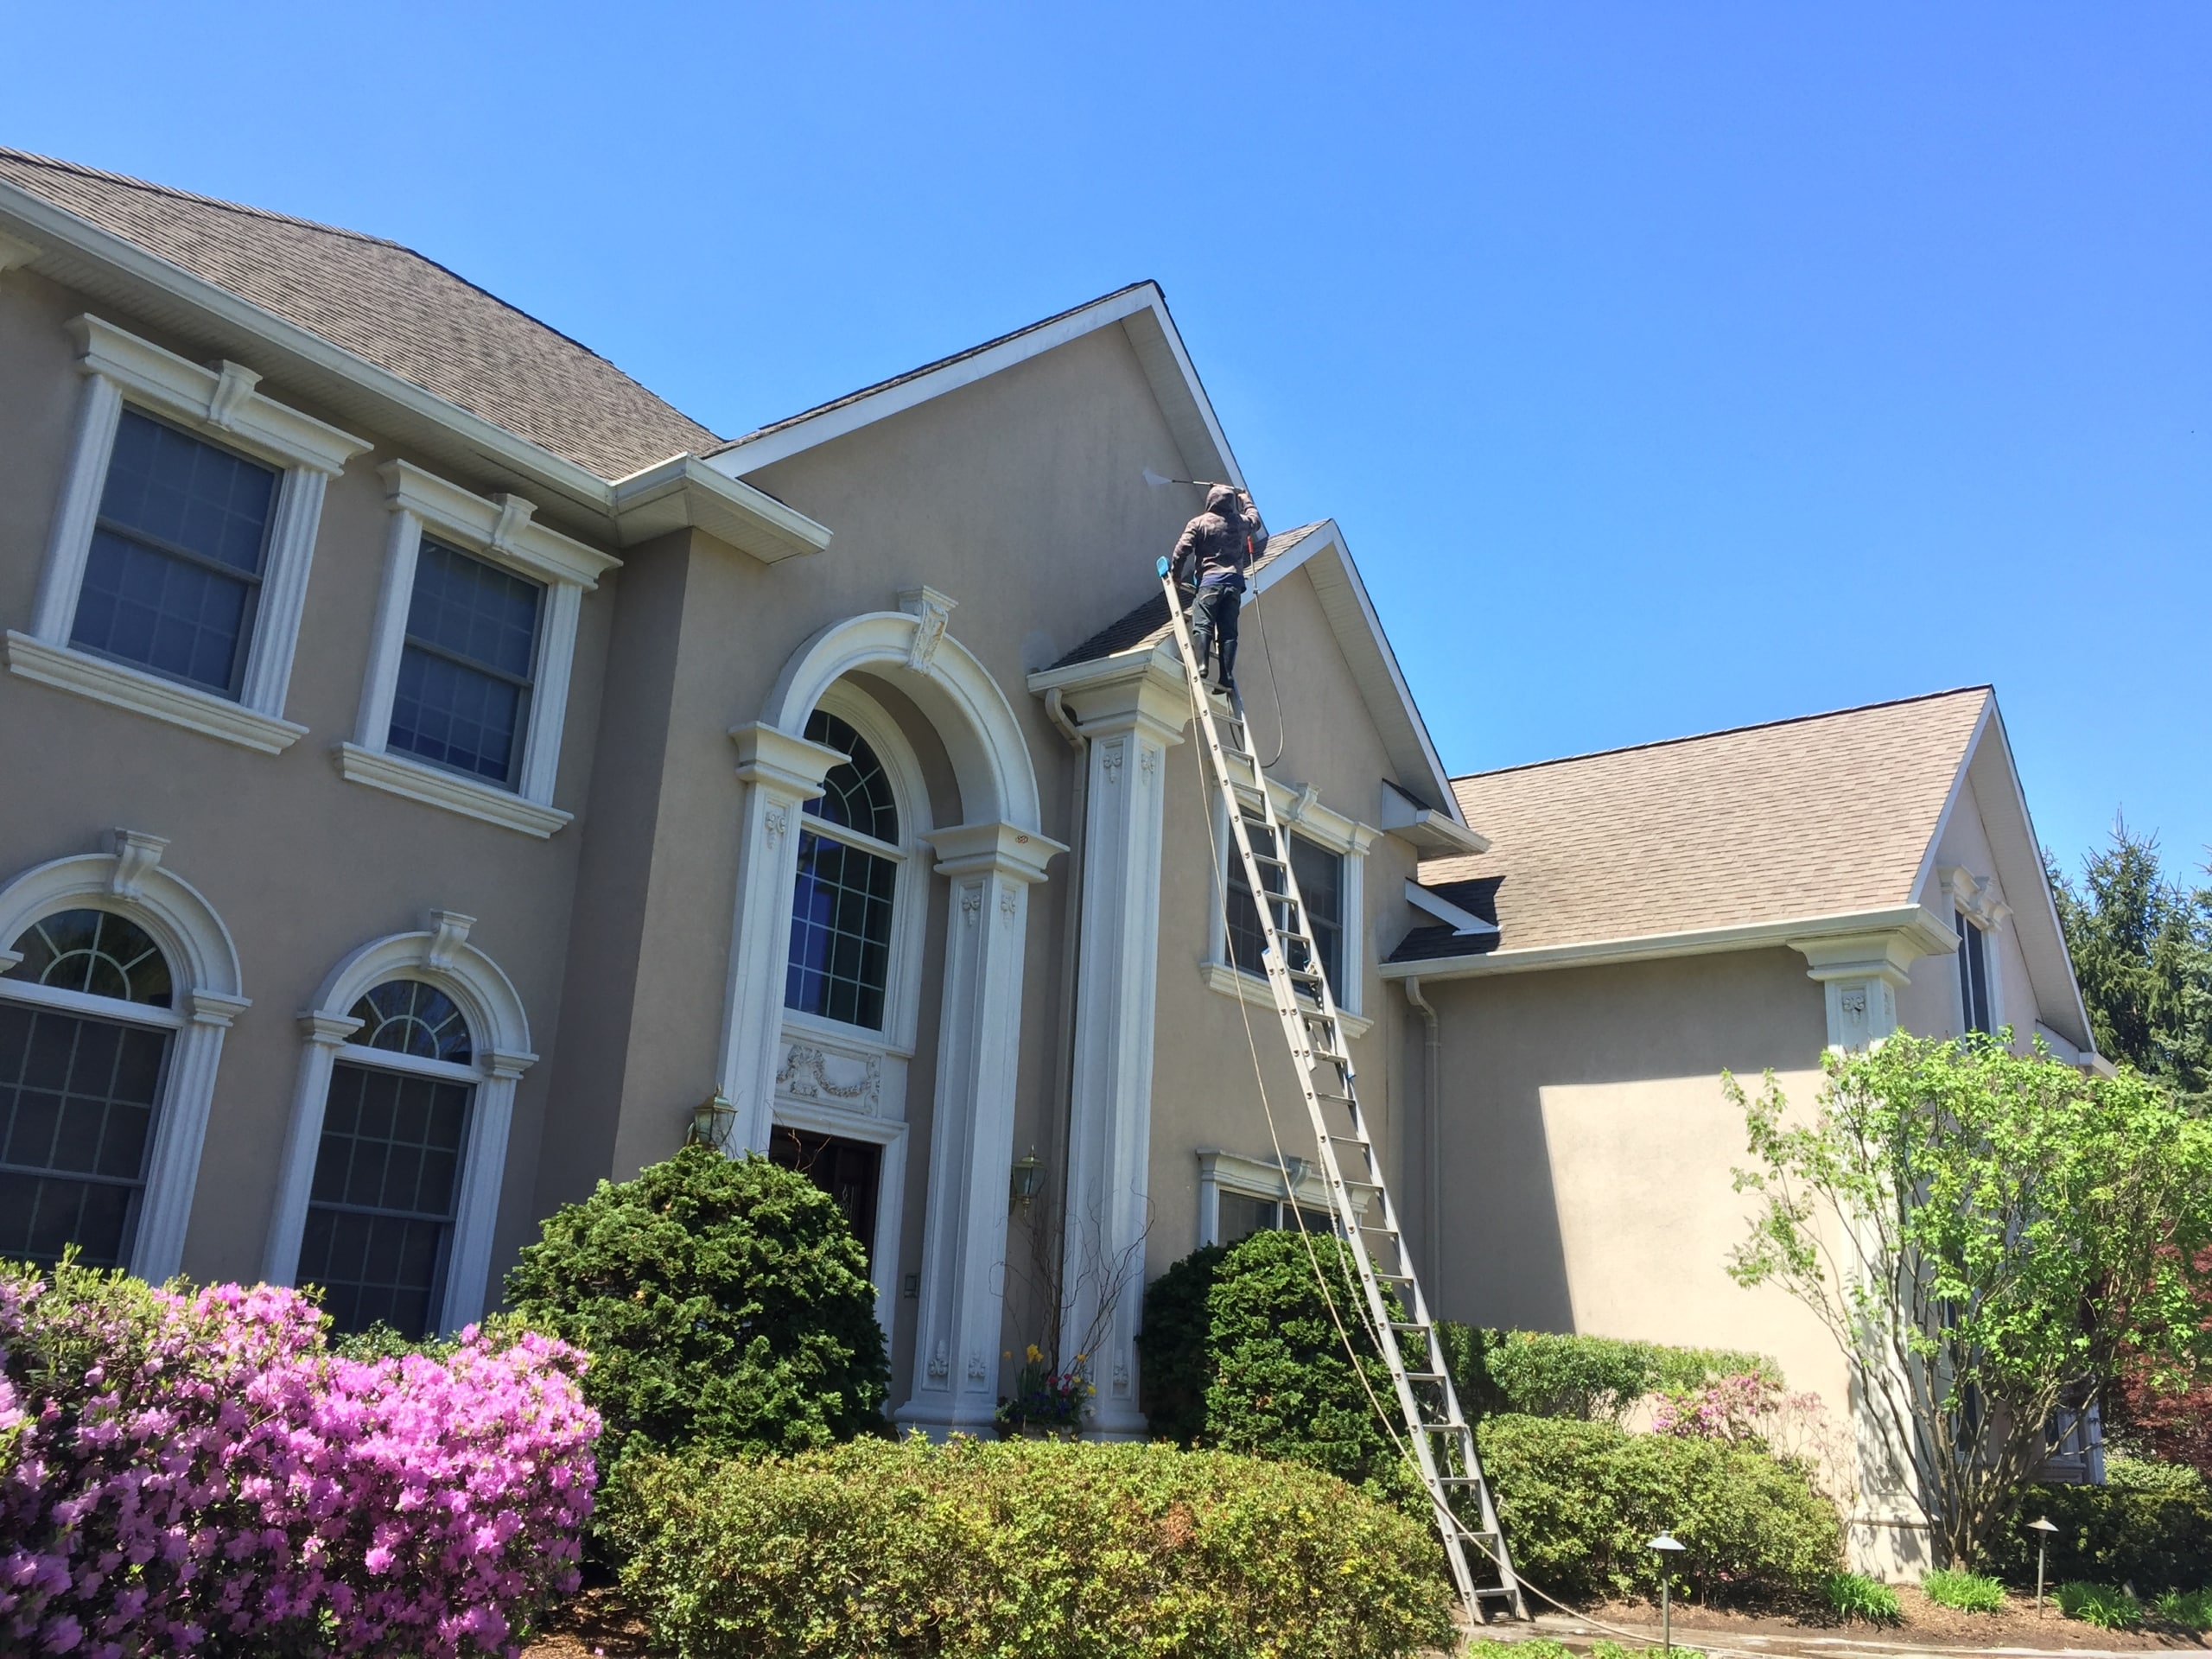 Roof Cleaning and Power Washing of a Home in Mahwah, New Jersey